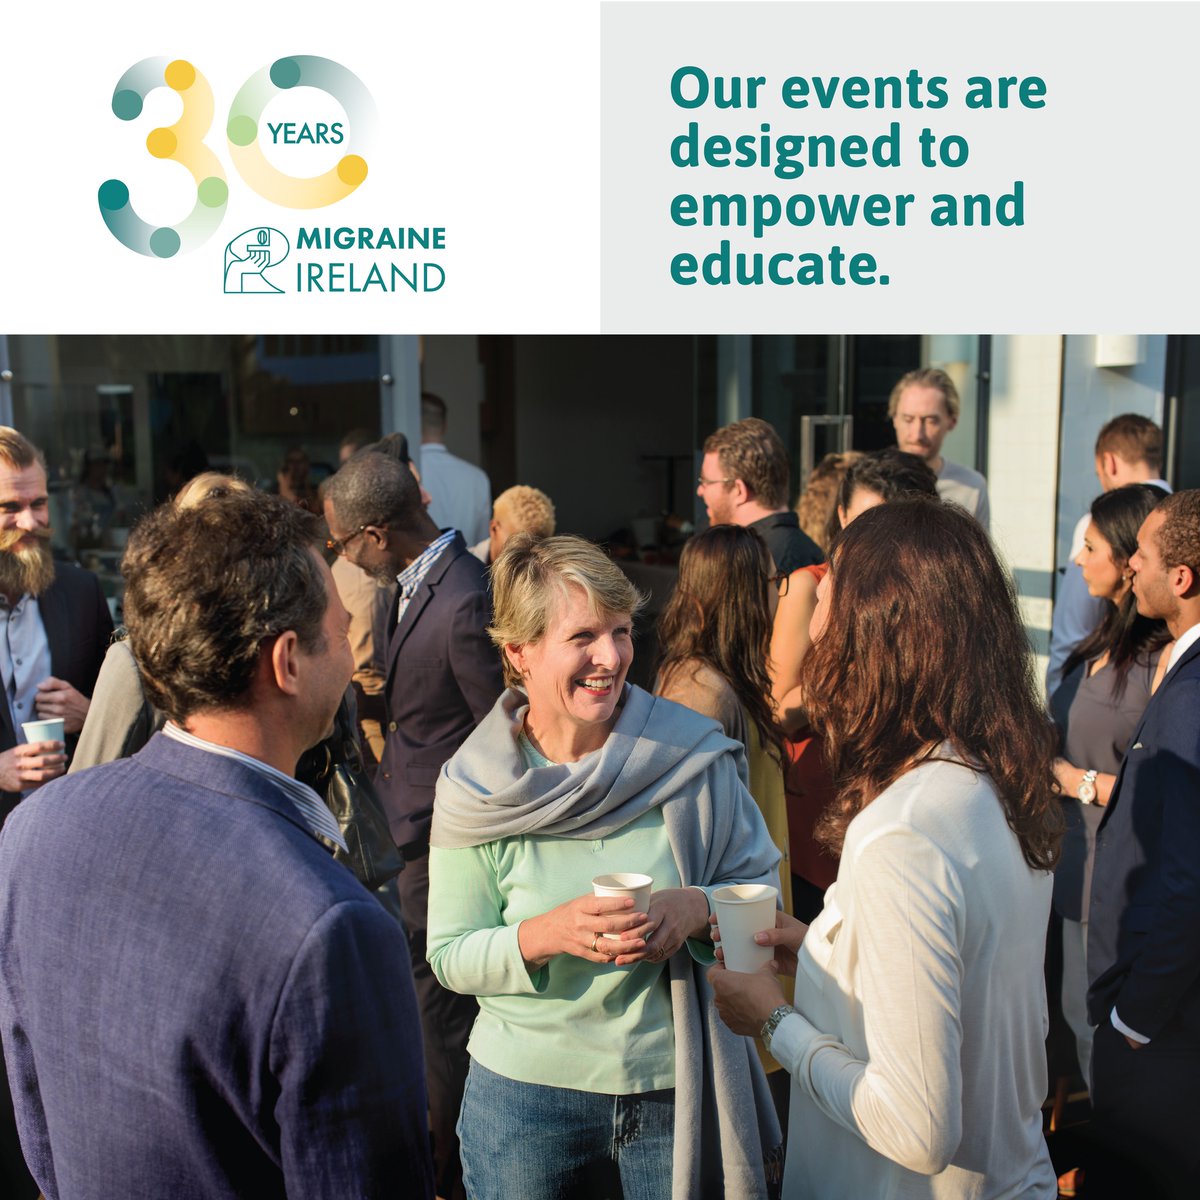 Connect, learn, and share at our upcoming #events tailored for the #migraine community. From workshops to support groups, our events are designed to empower and educate. Check out the full calendar on our website: shorturl.at/gjsZ4 #notjustaheadache #disability